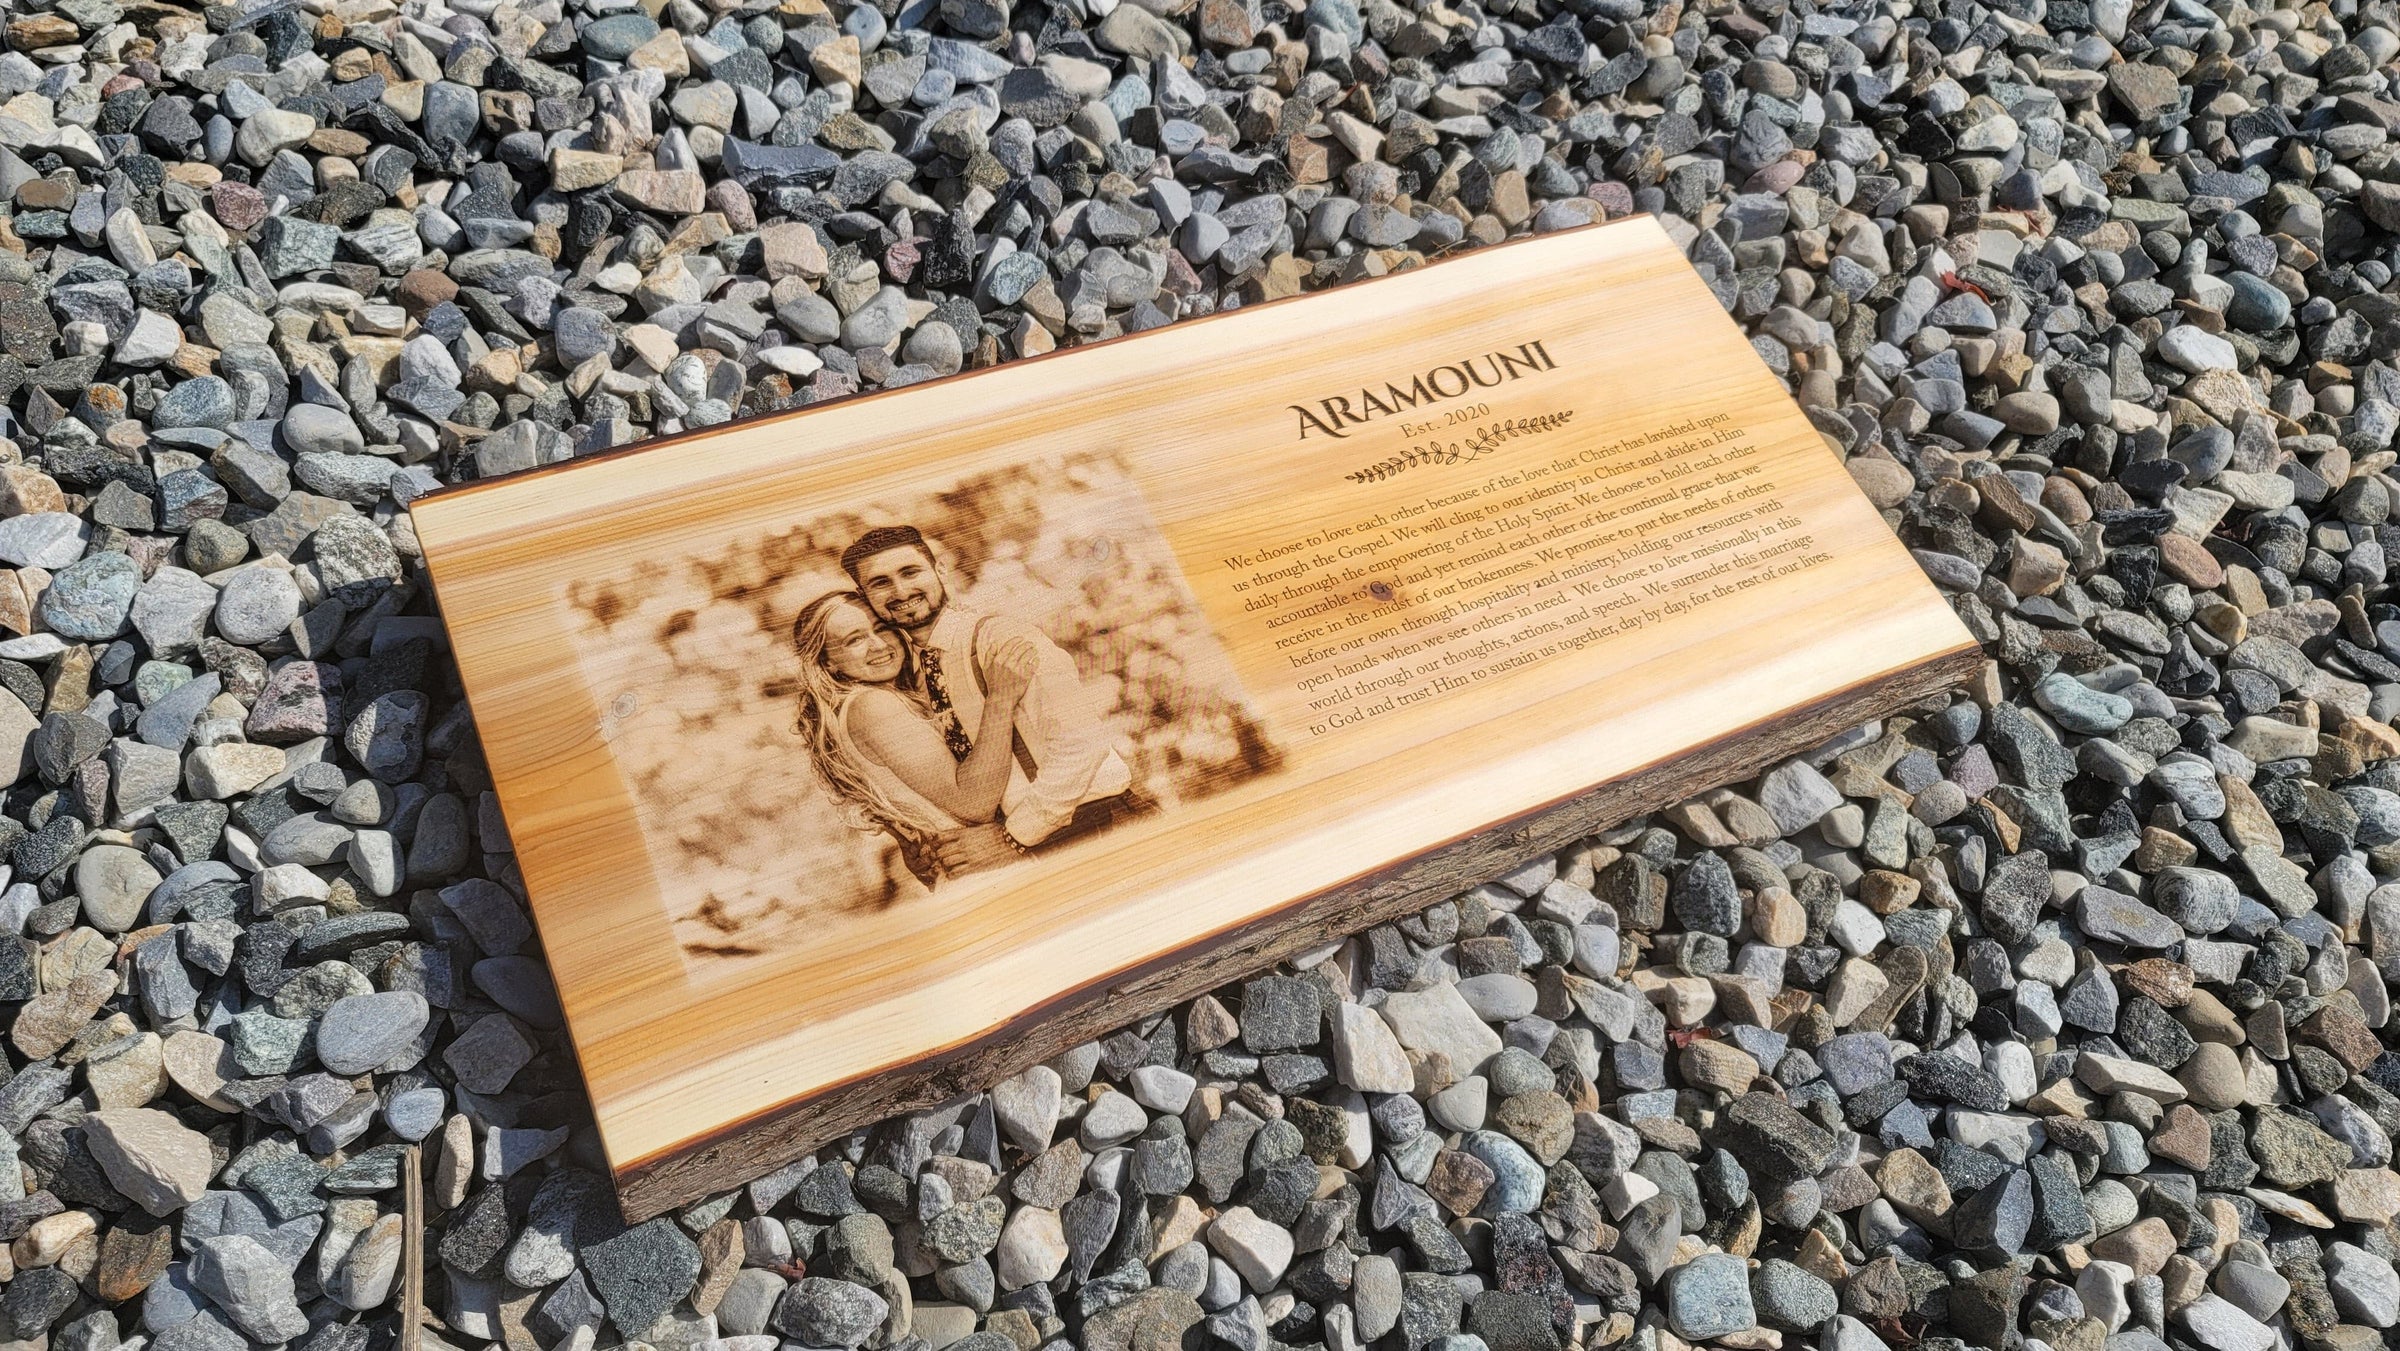 Personalized Engraved Marriage Gifts for Couples Photo Plaque (8 x 6  inches) - Incredible Gifts